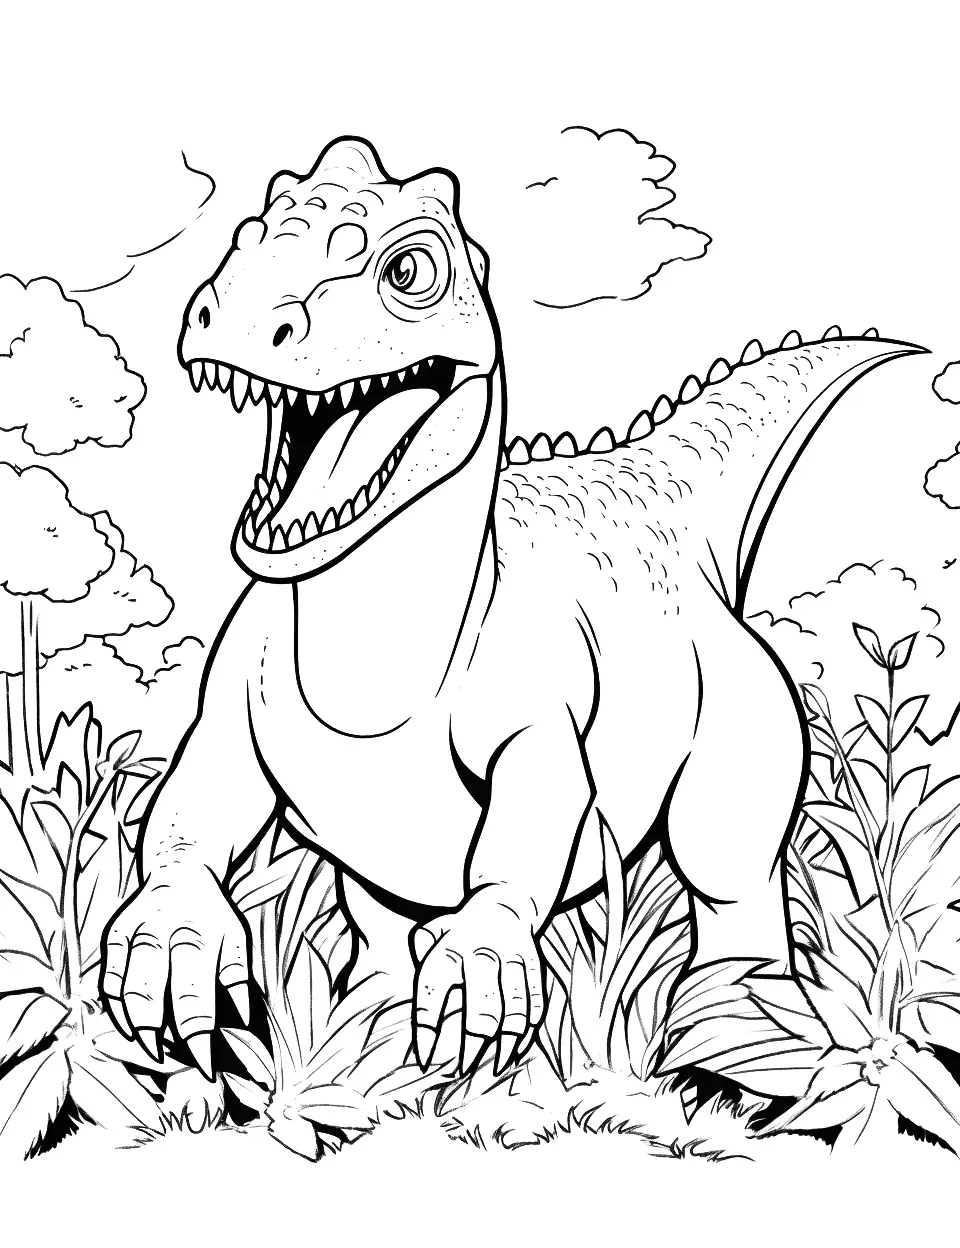 Carnotaurus Charge Dinosaur Coloring Page - A Carnotaurus charging through the underbrush.